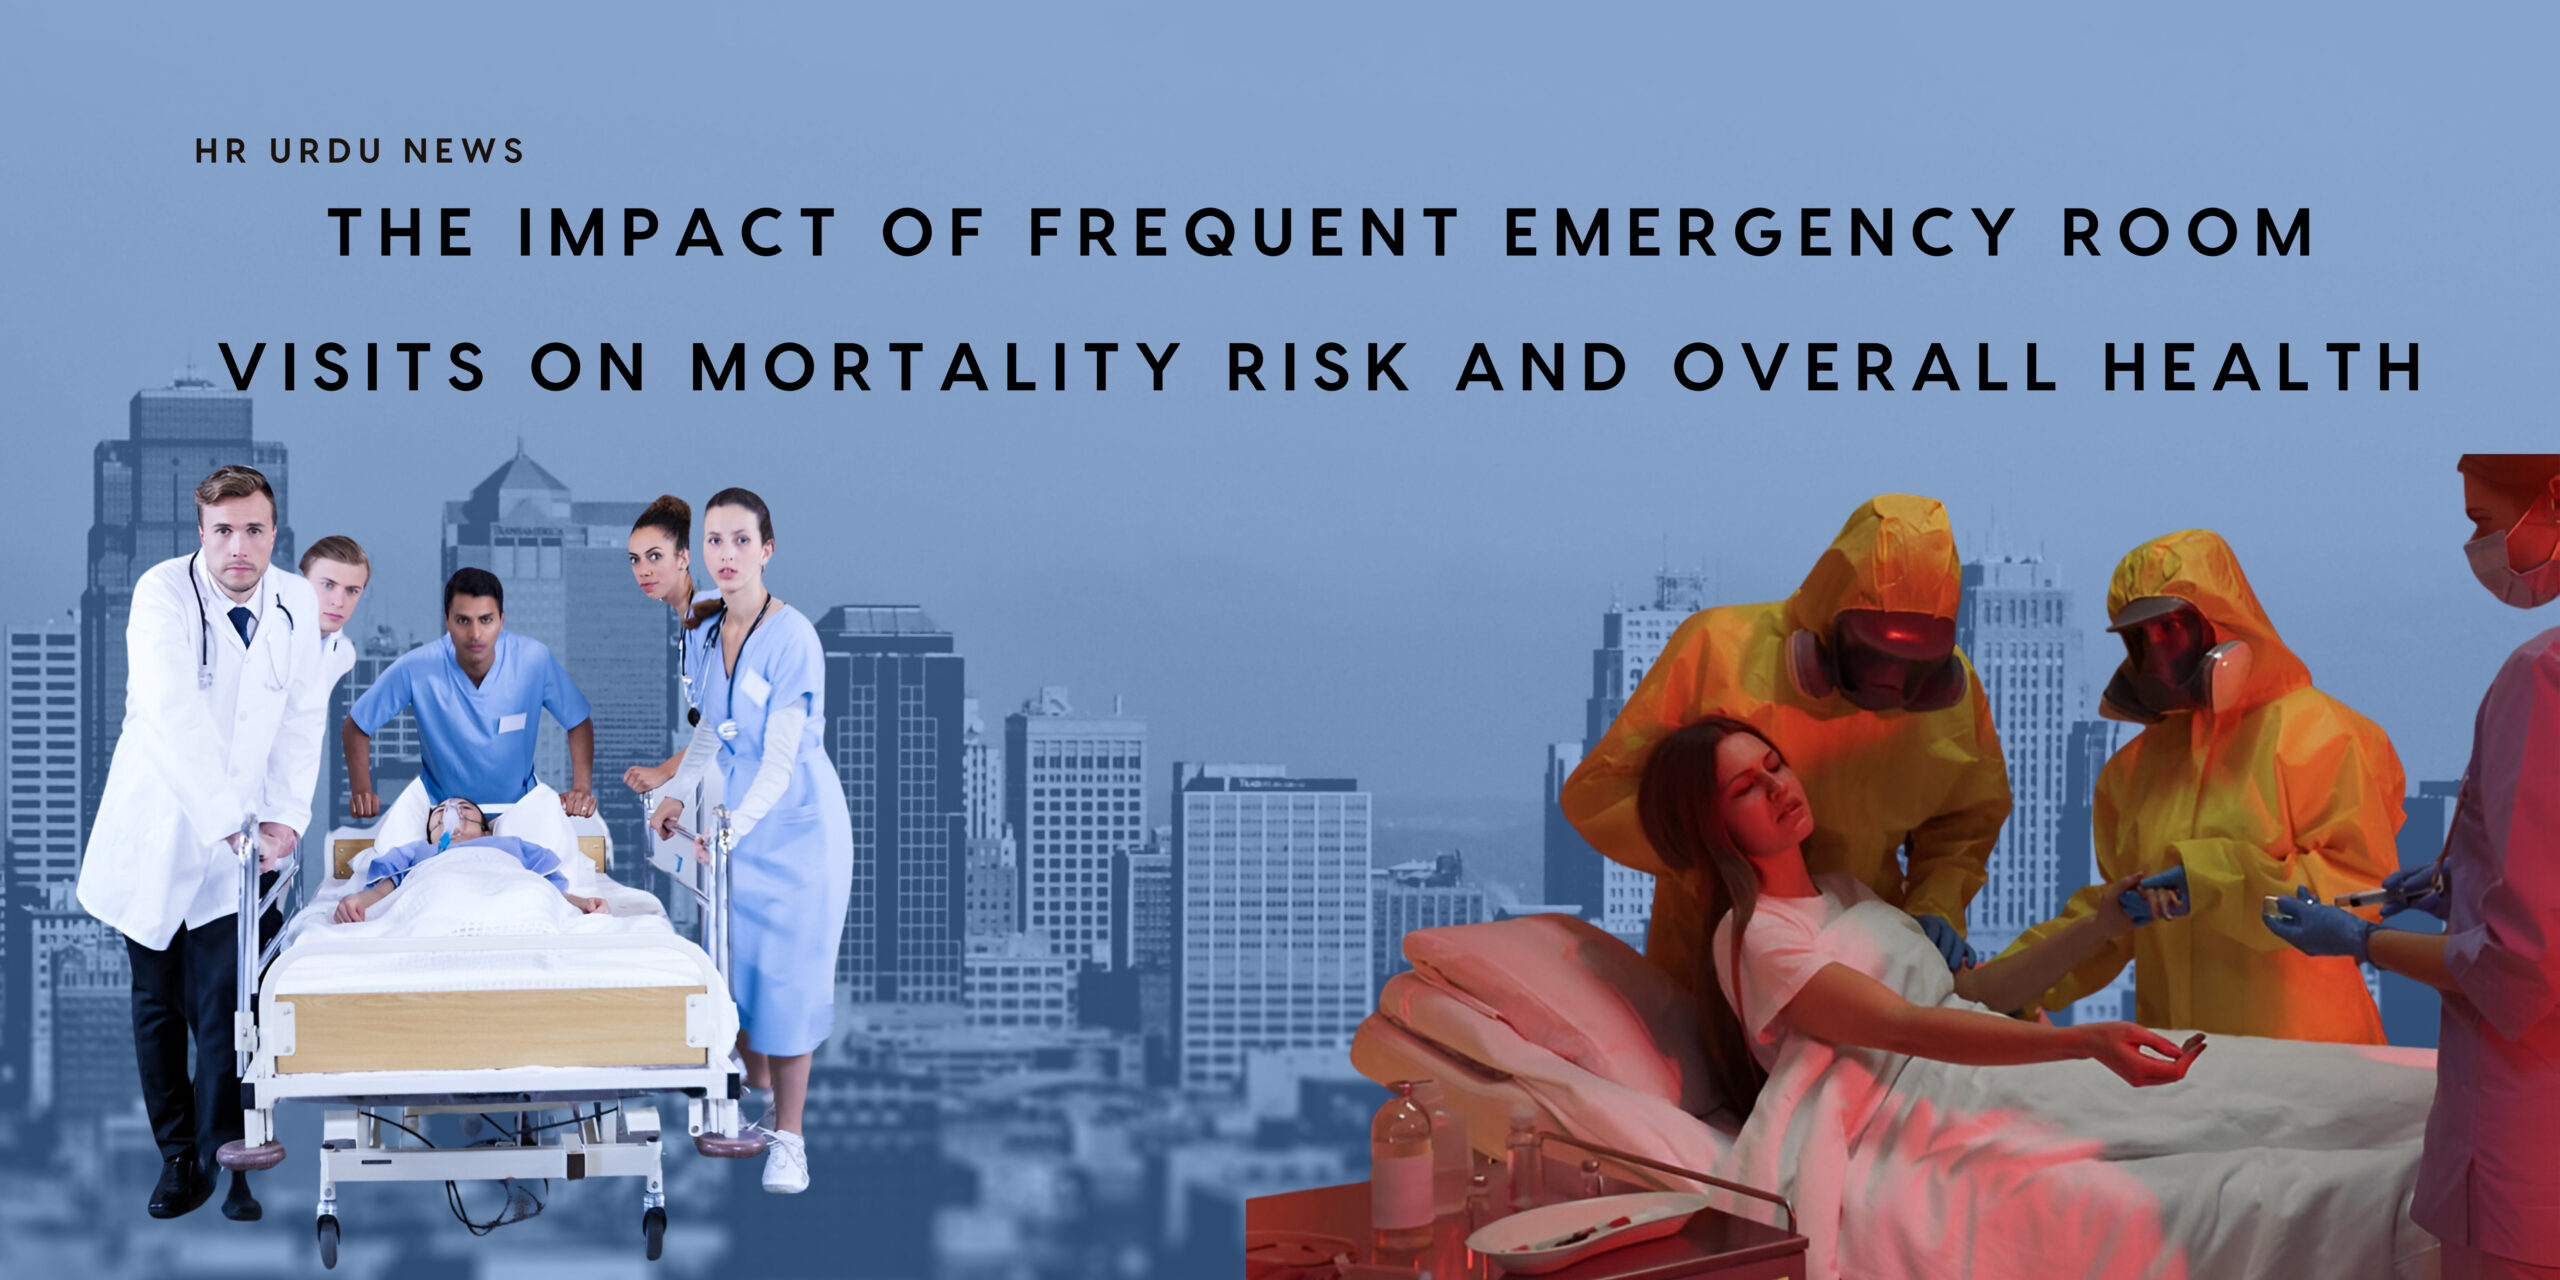 The Impact of Frequent Emergency Room Visits on Mortality Risk and Overall Health